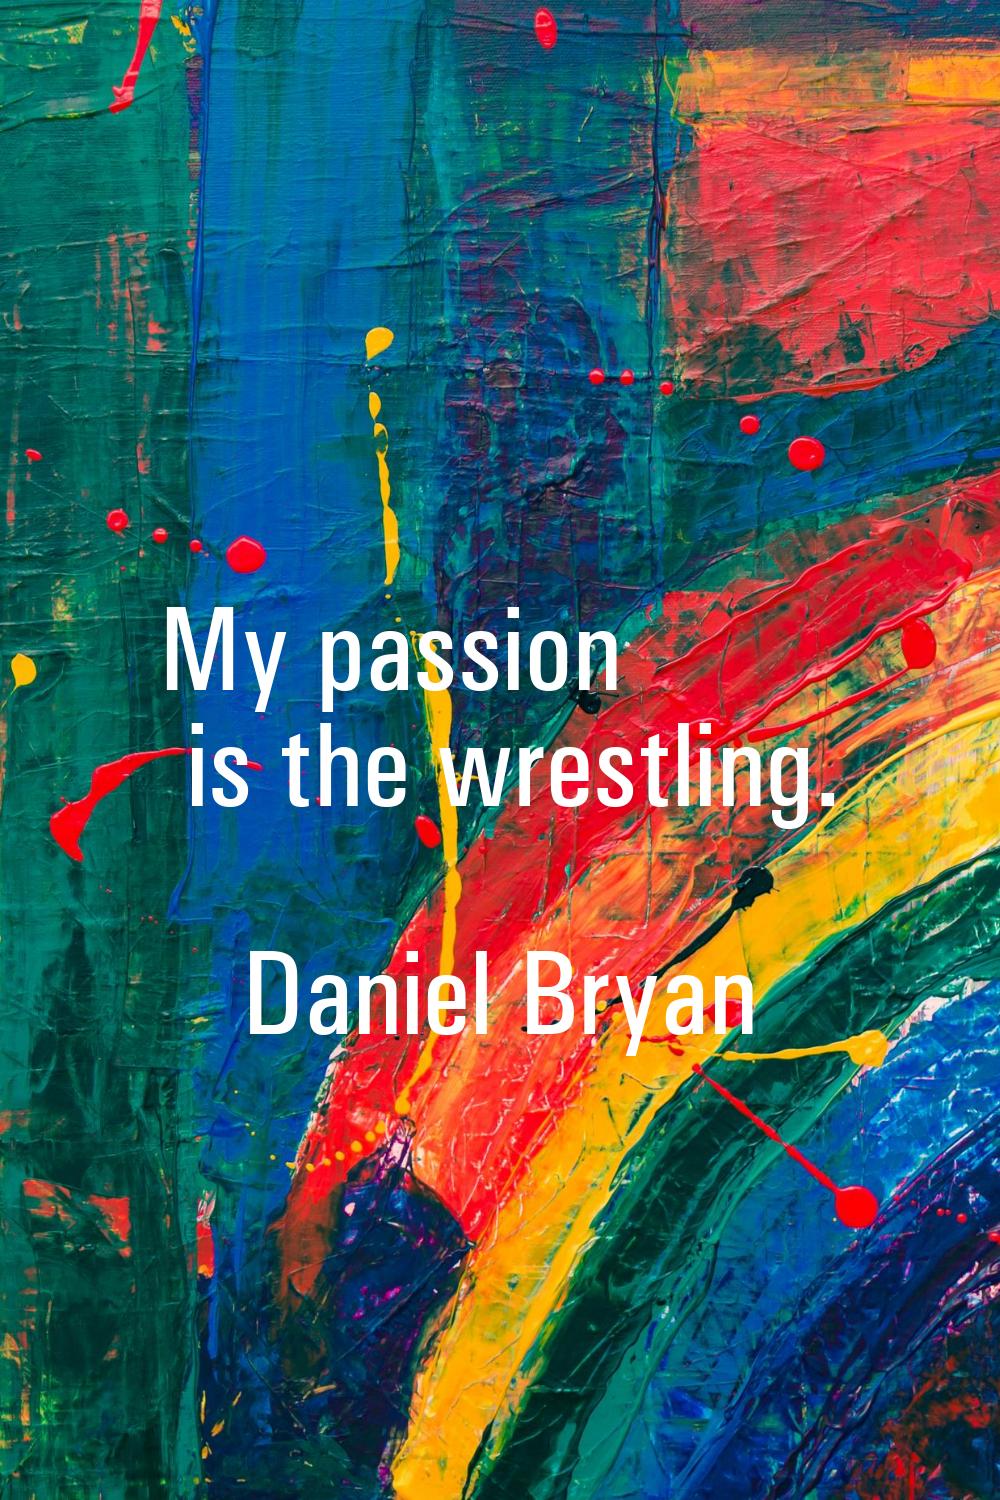 My passion is the wrestling.